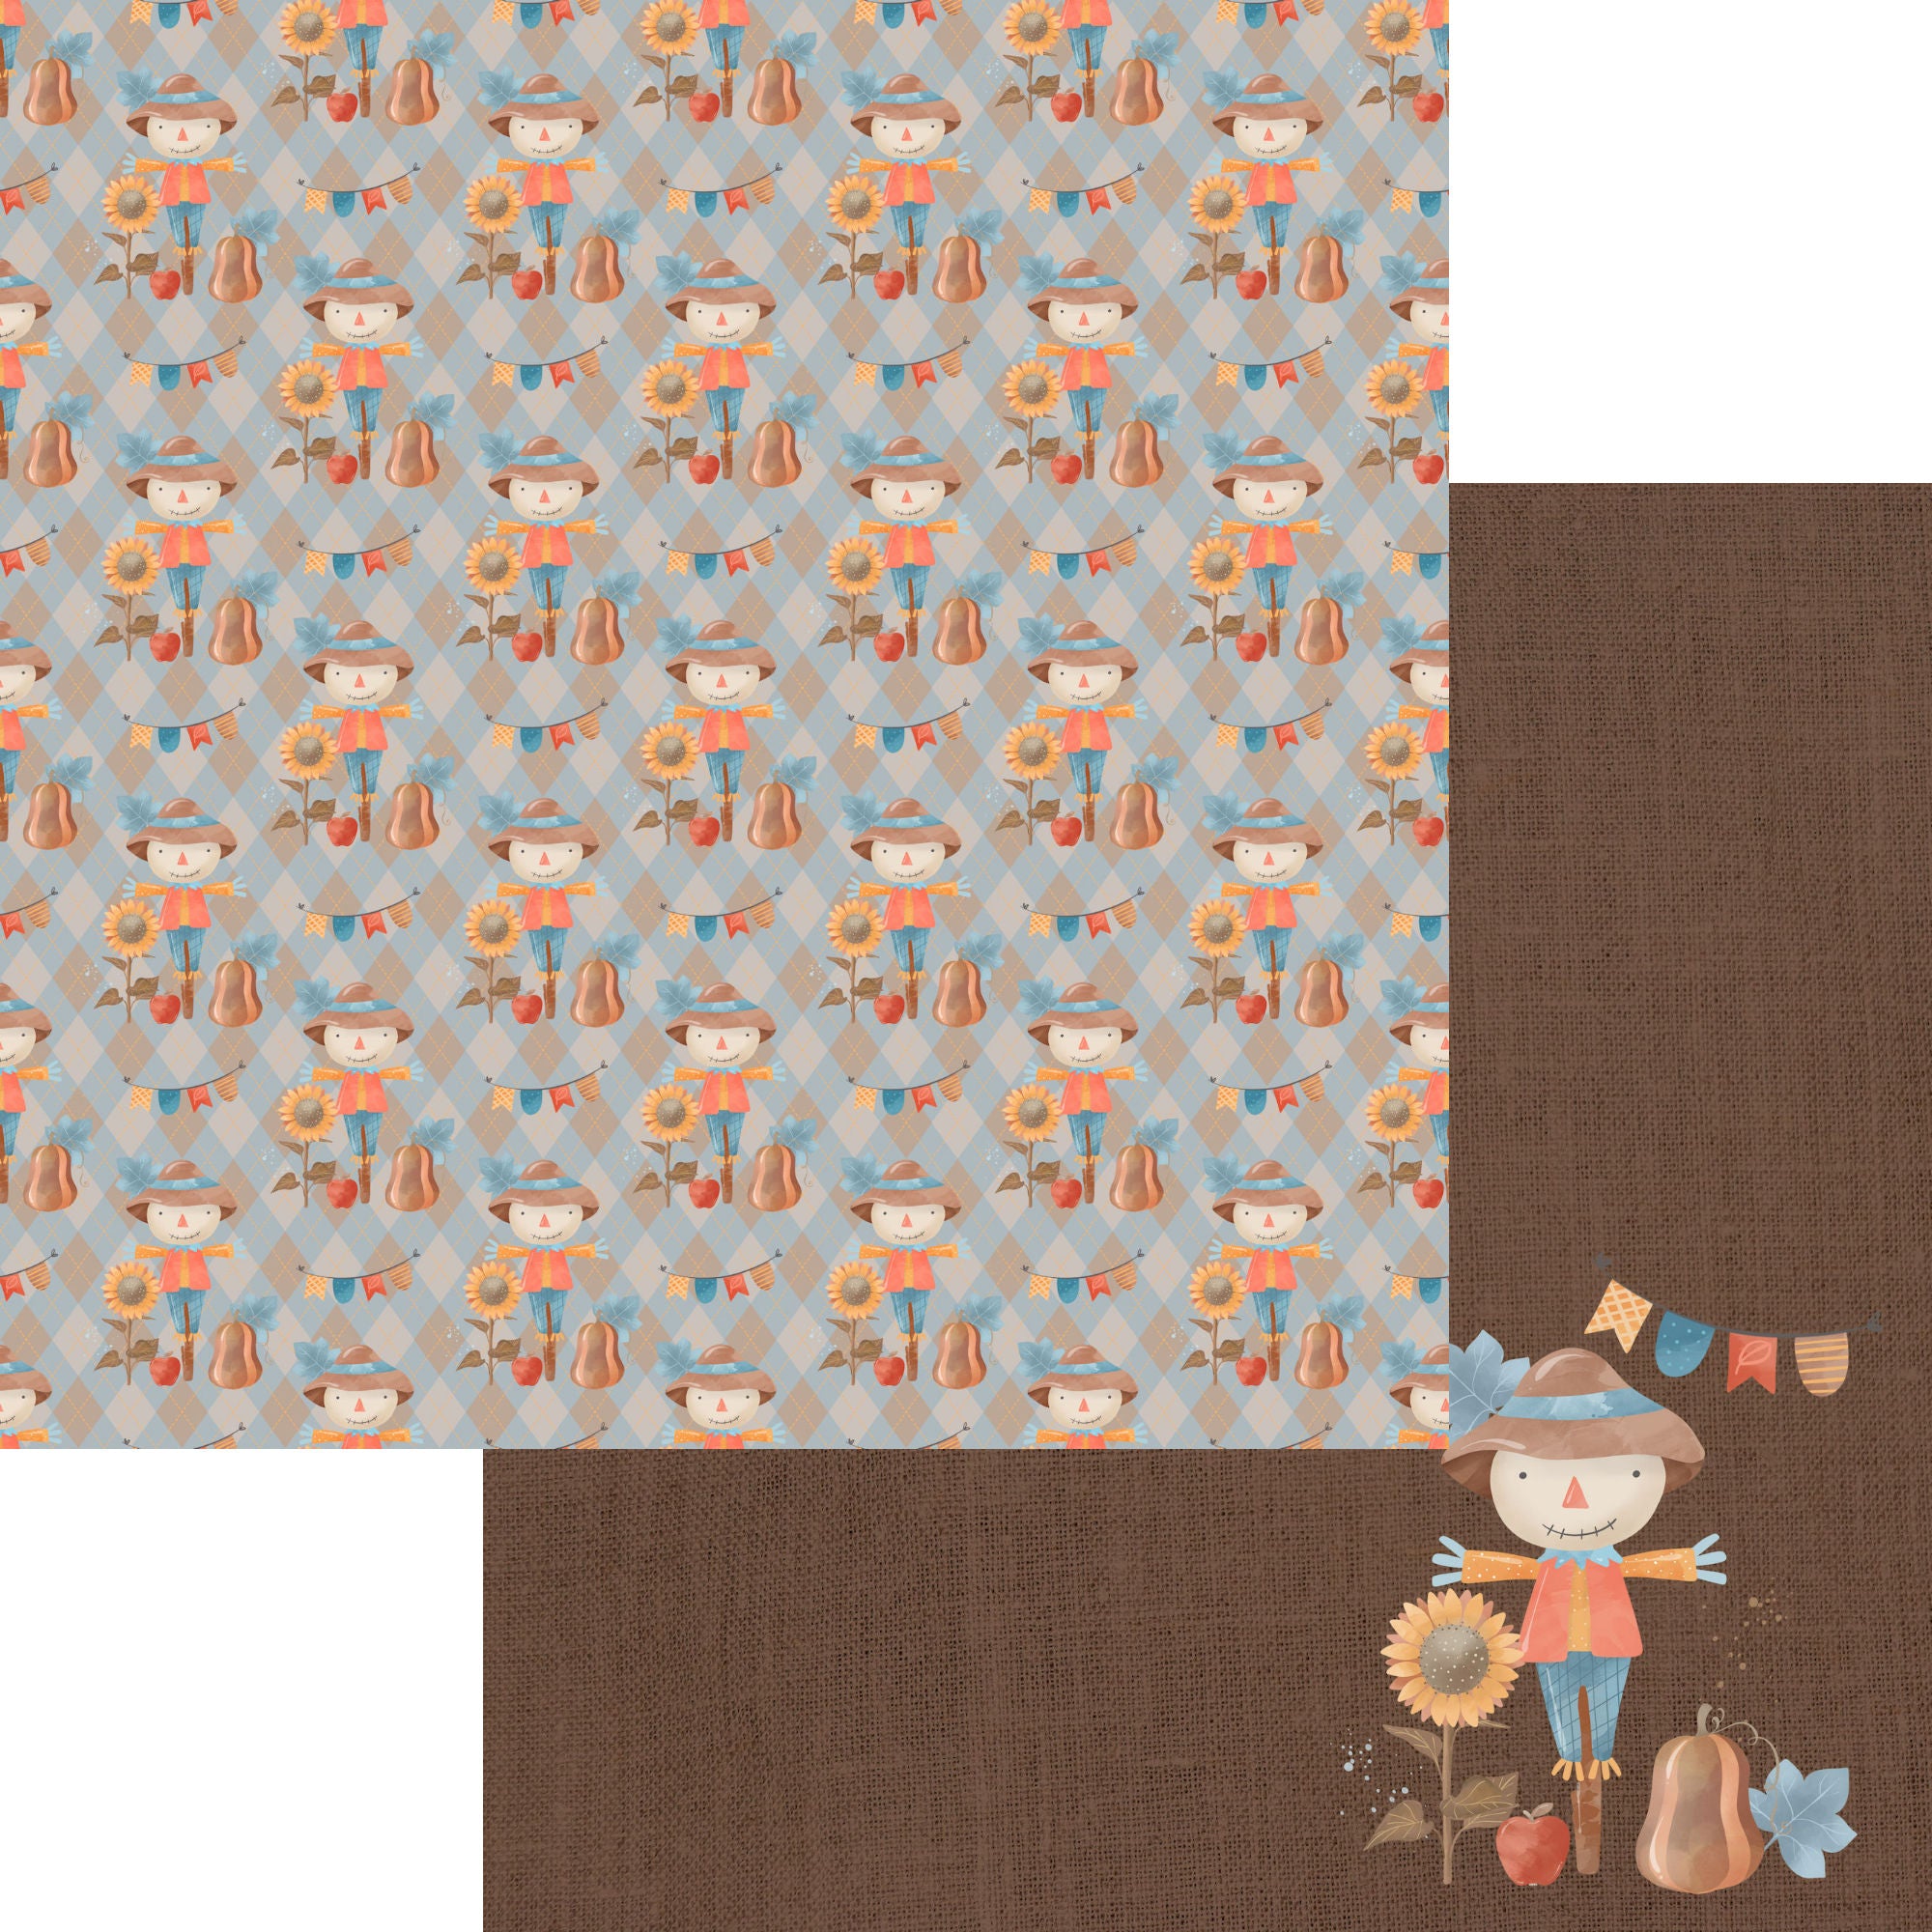 Give Thanks Collection Scarecrow Love 12 x 12 Double-Sided Scrapbook Paper by SSC Designs